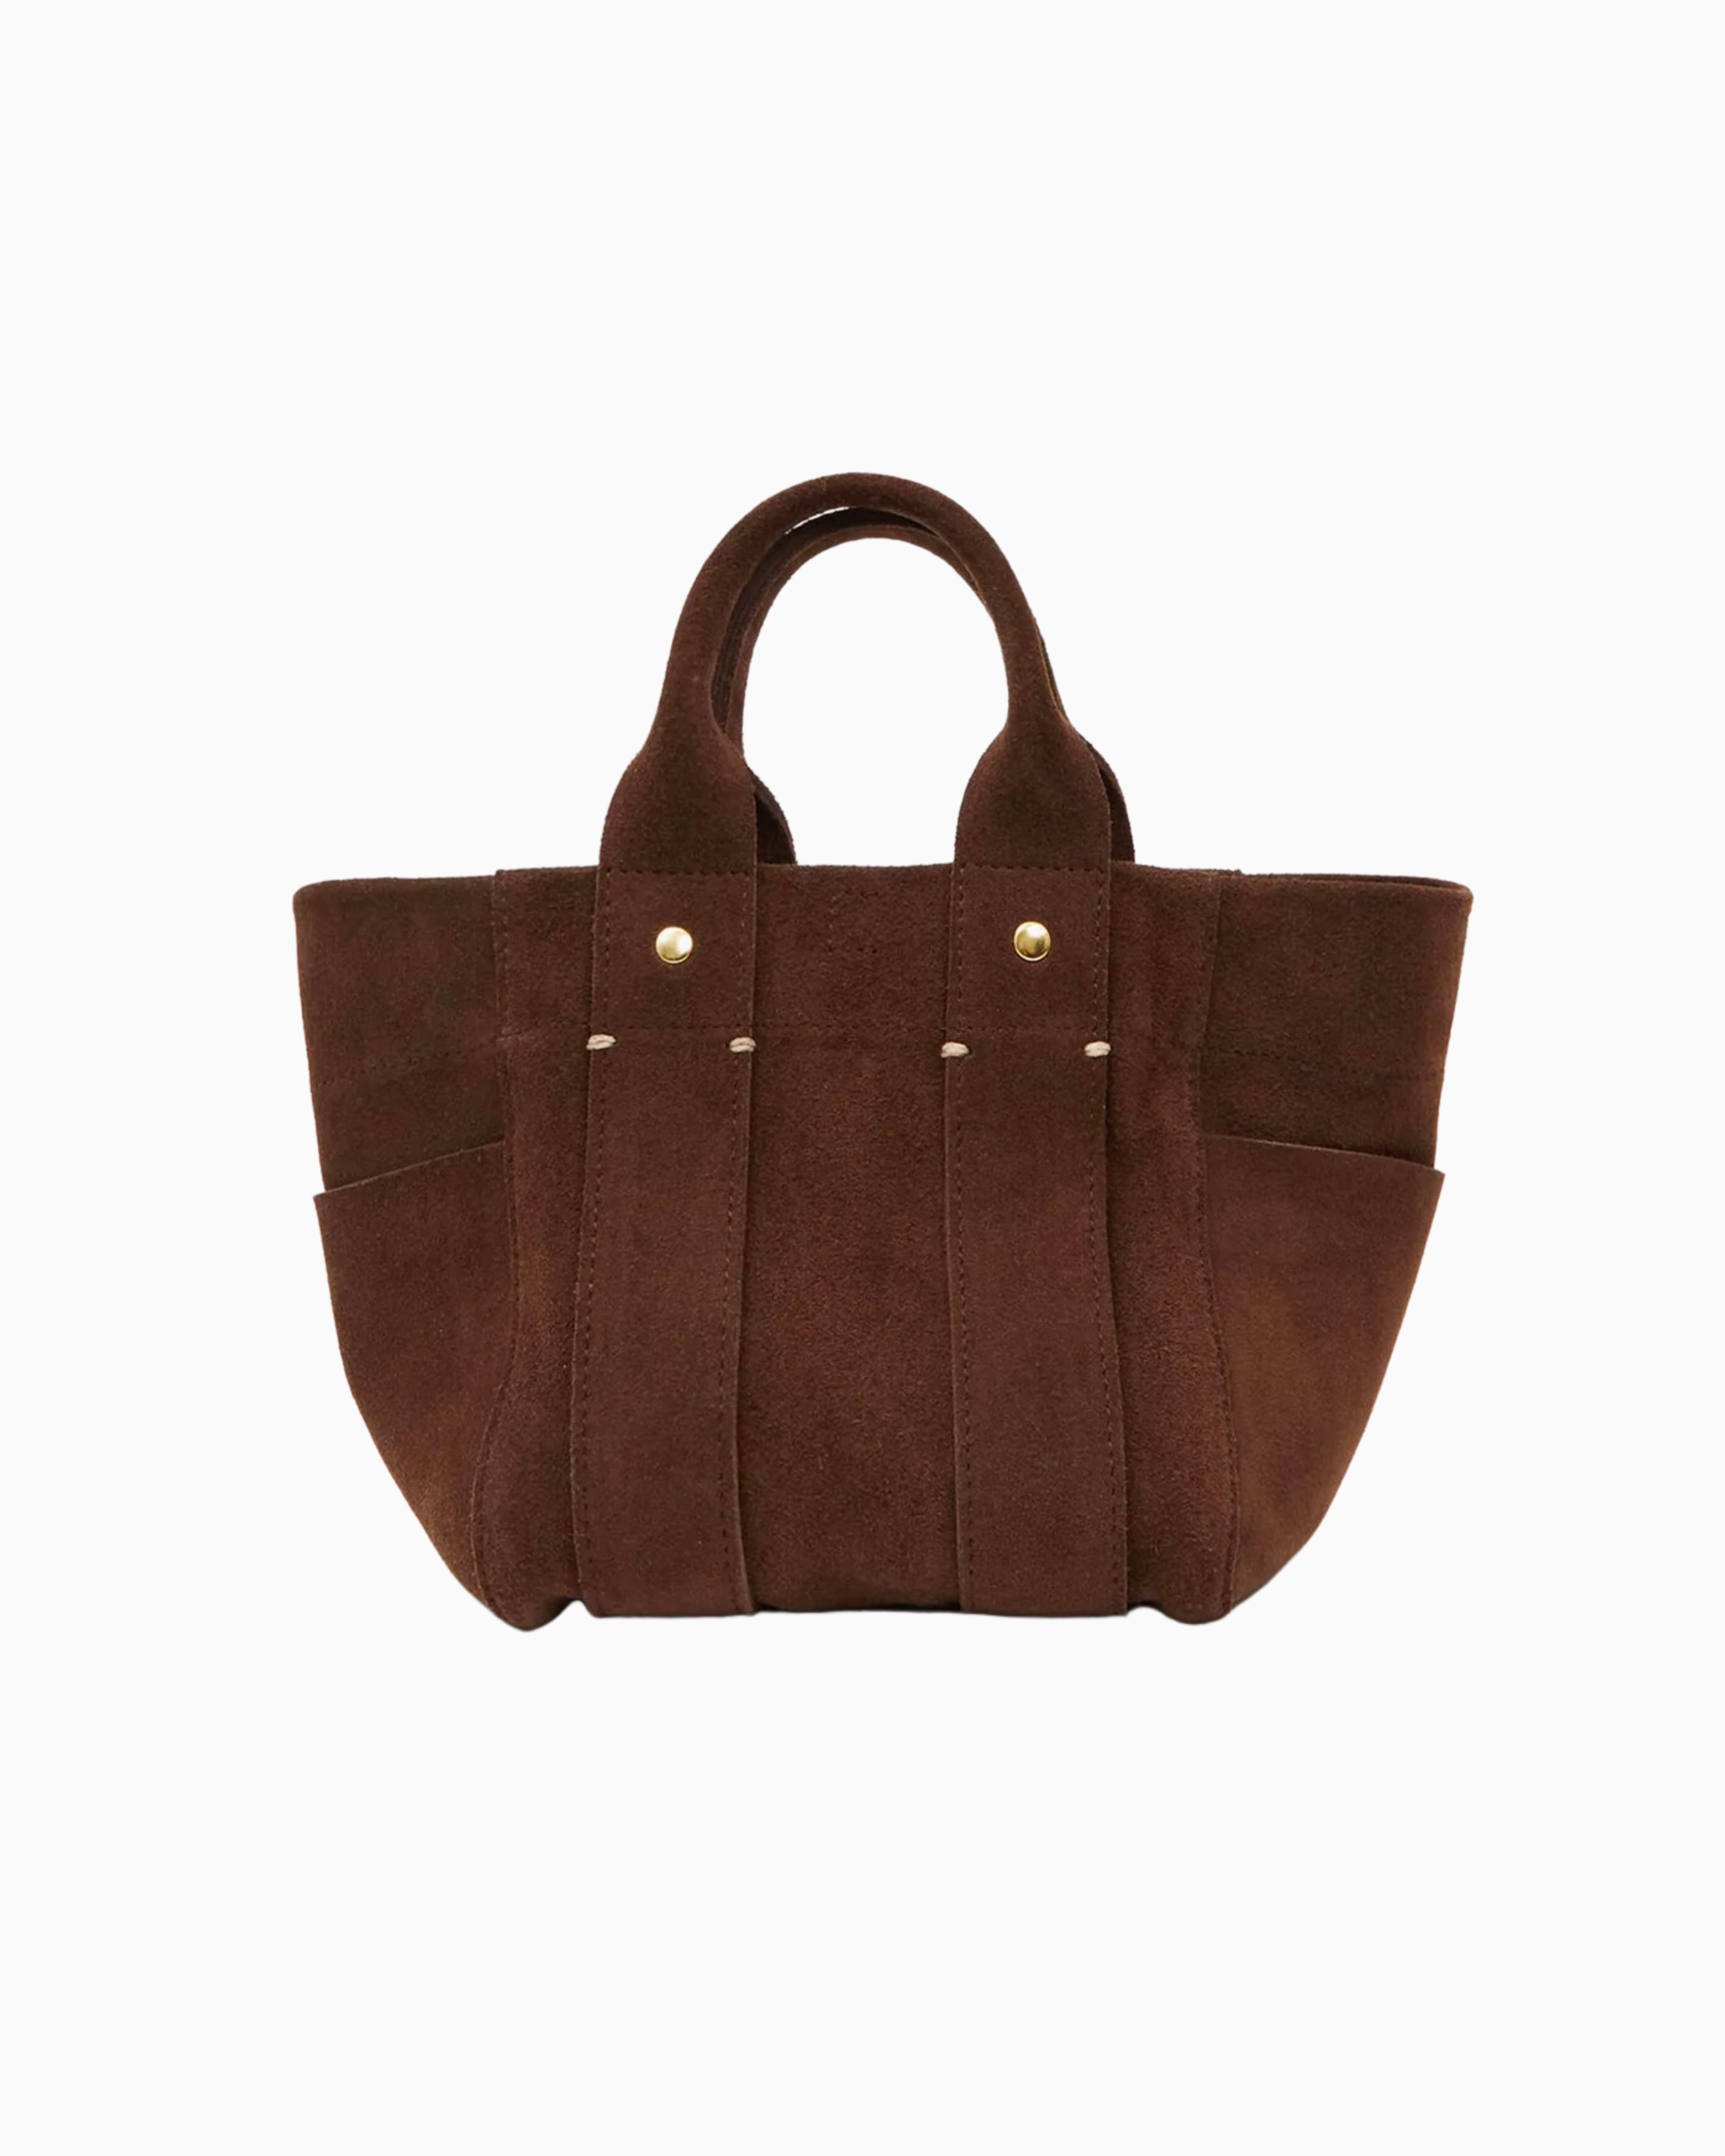 Clare V Le Petit Box Tote in Chocolate Suede